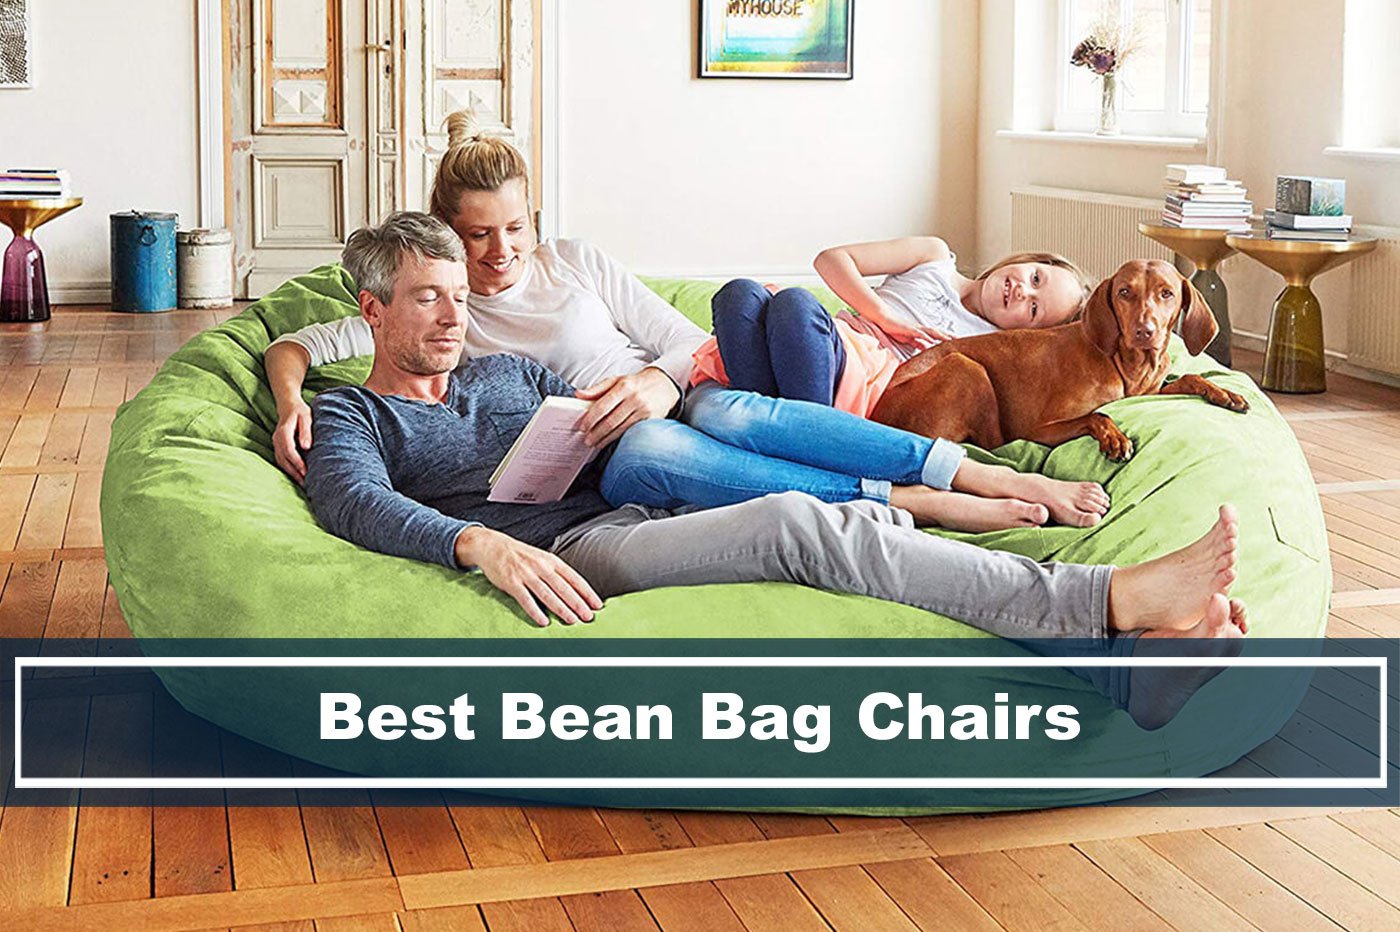 10 Best Bean Bag Chairs Reviewed for Comfort and Enjoyment in 2020